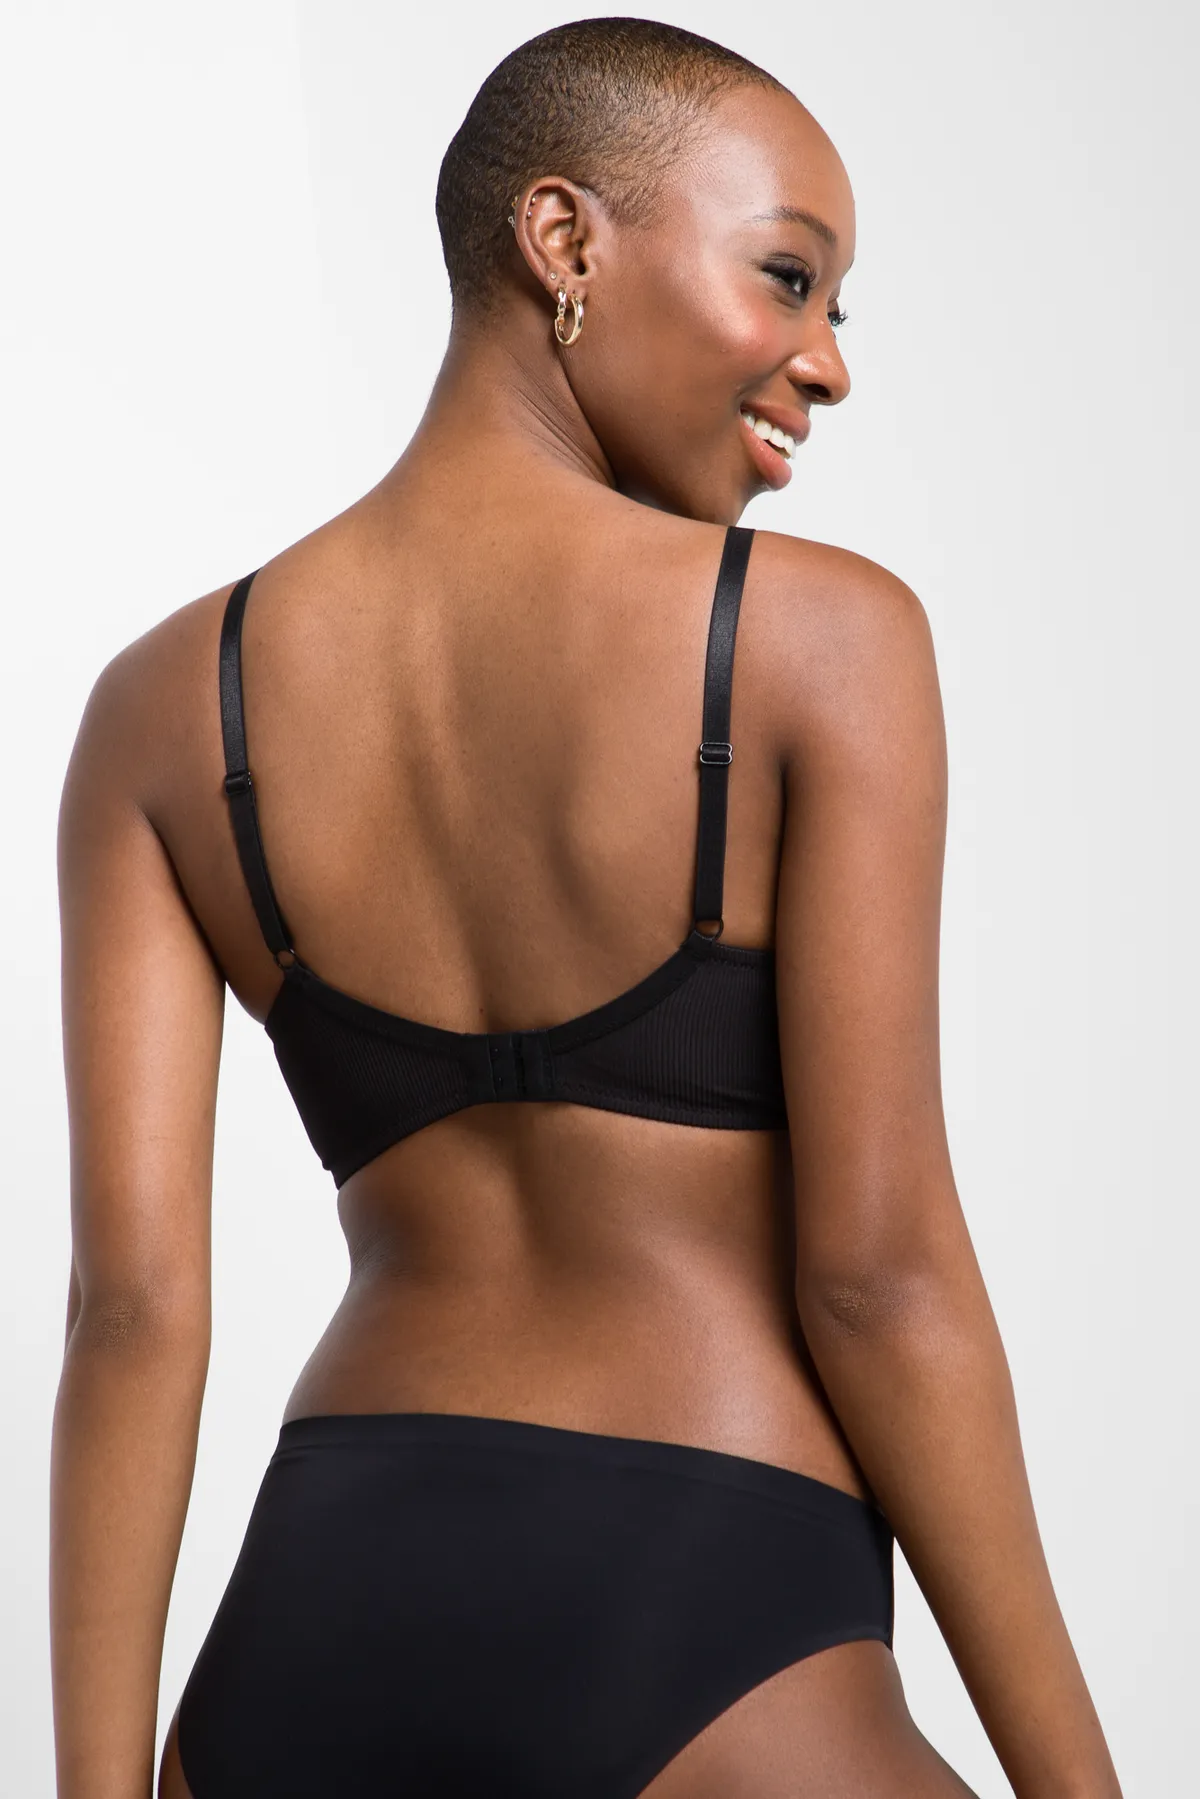 Ackermans - With 2-pack bras for 99.95, you pay less than 50.00